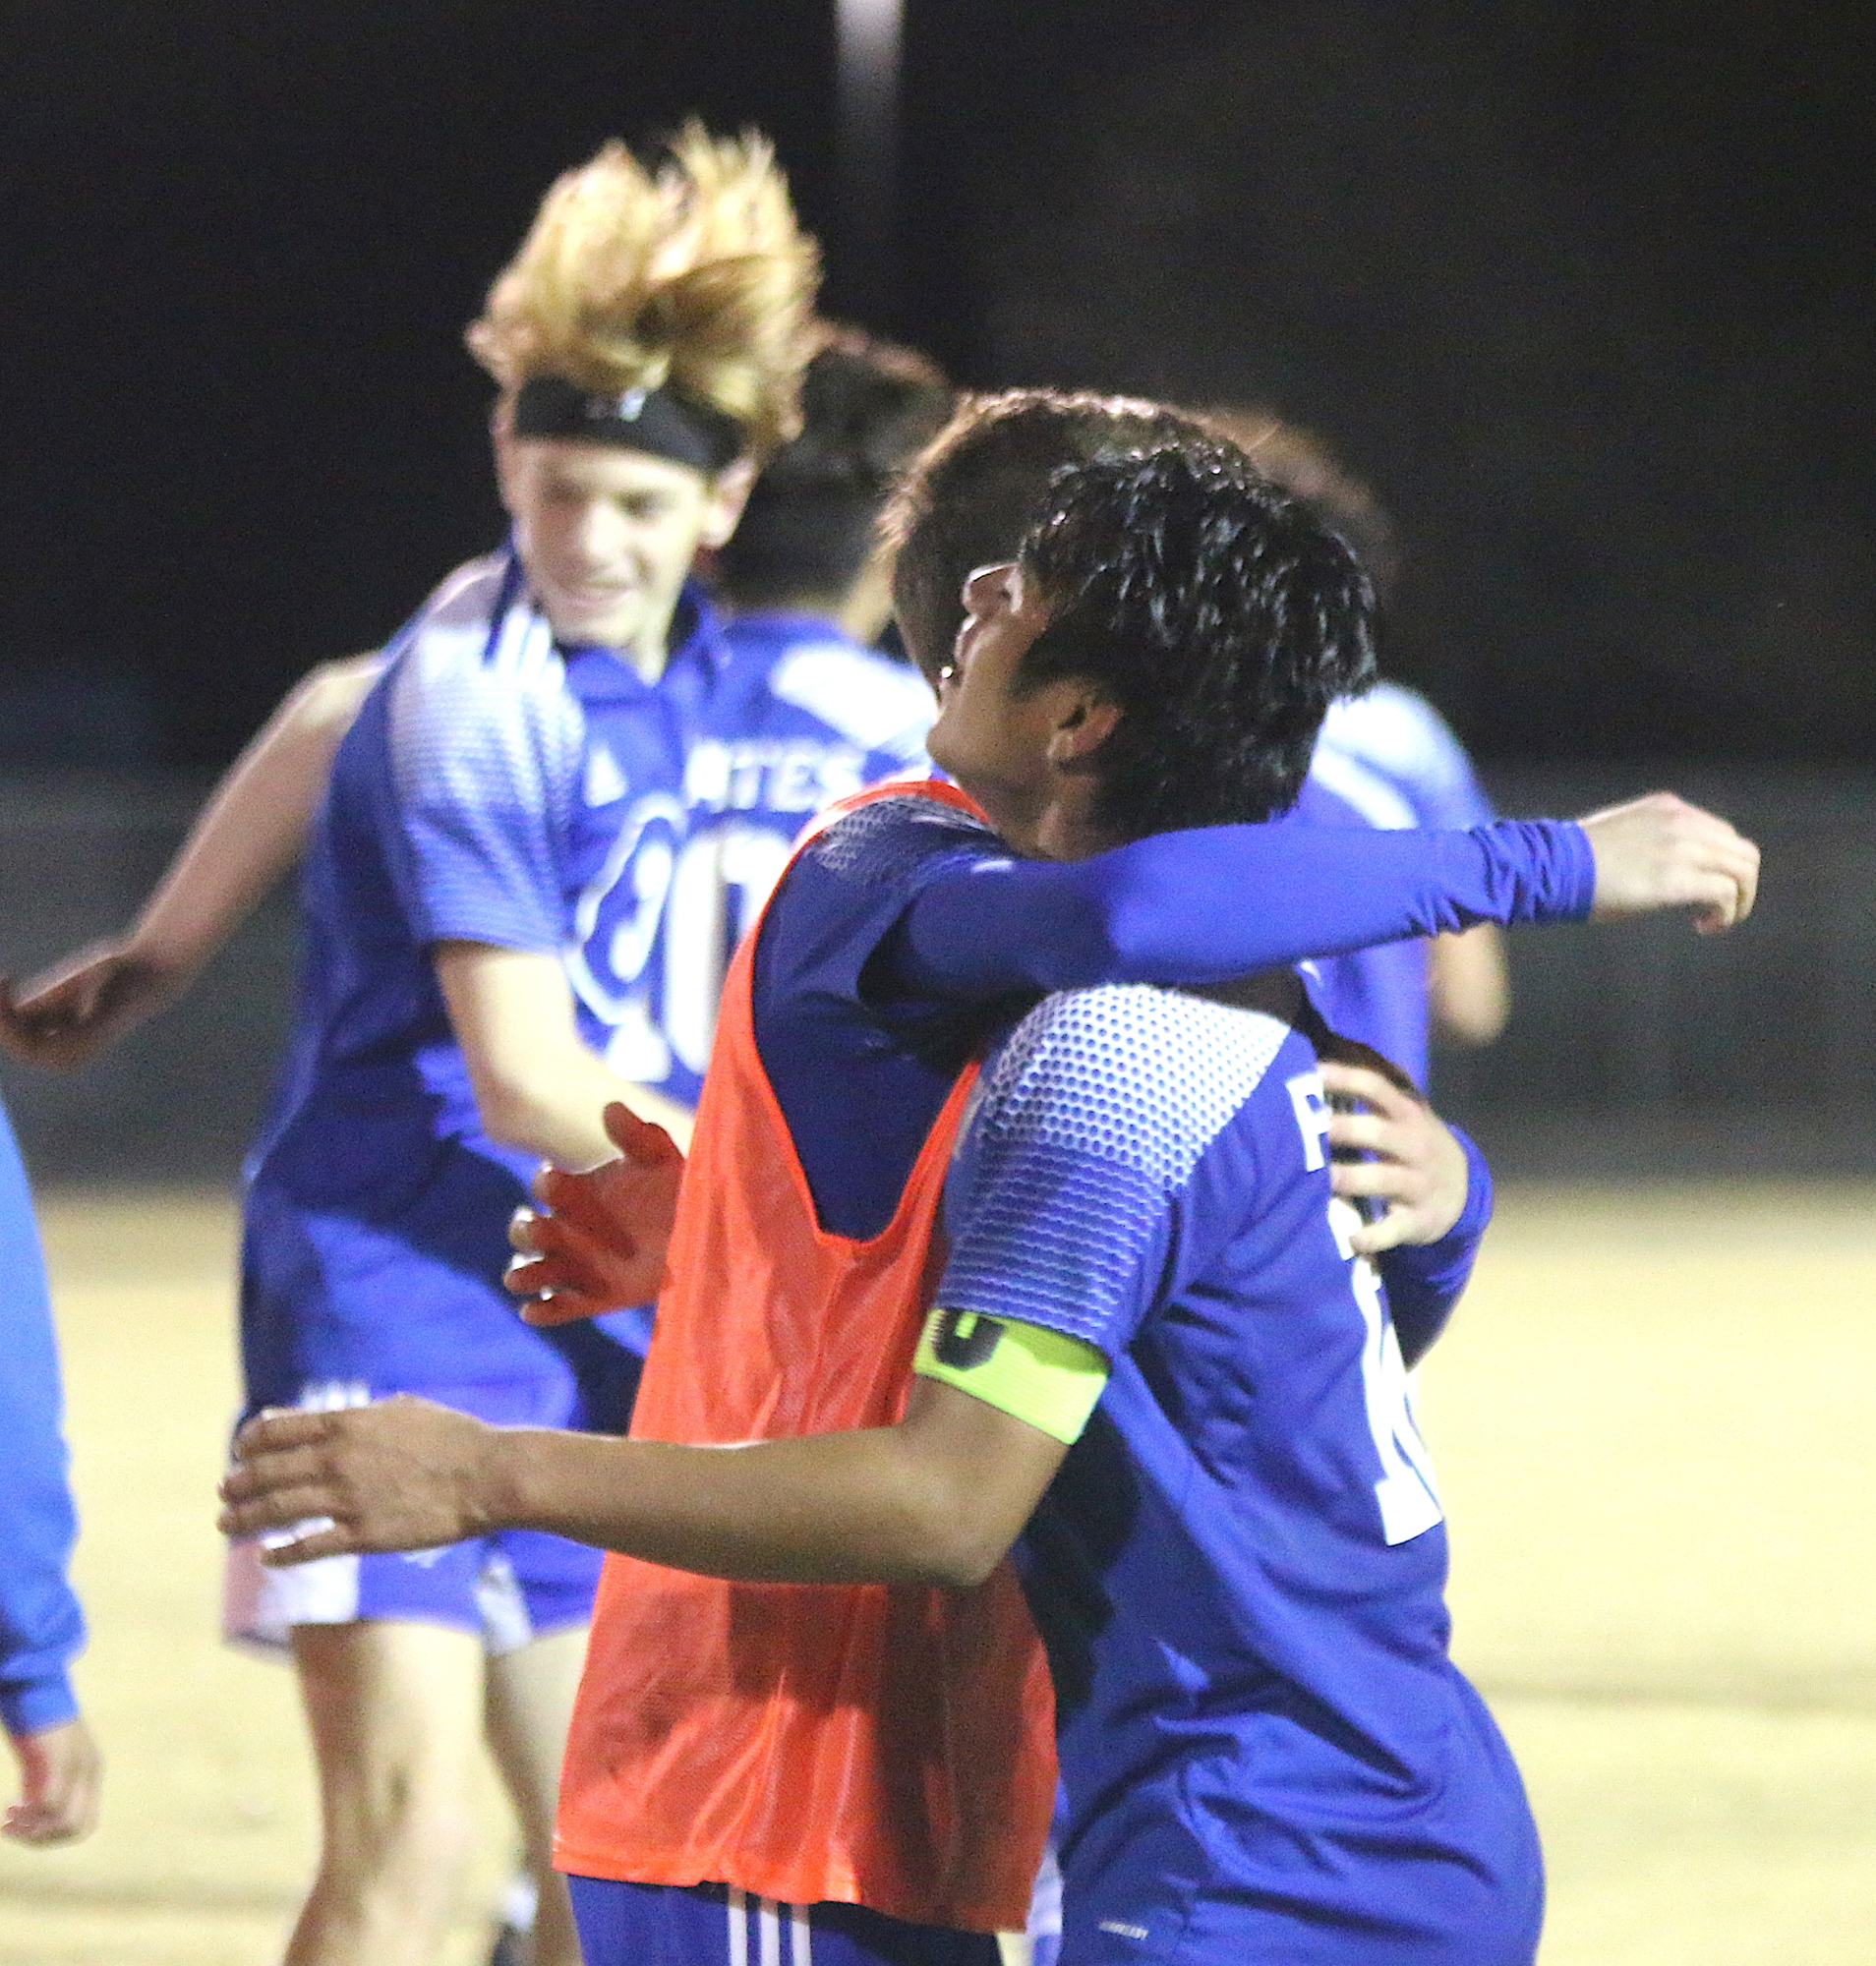 Joseph “Fuji” Powell, right, gets a hug after scoring the winning goal. Photo by Brent Woronoff